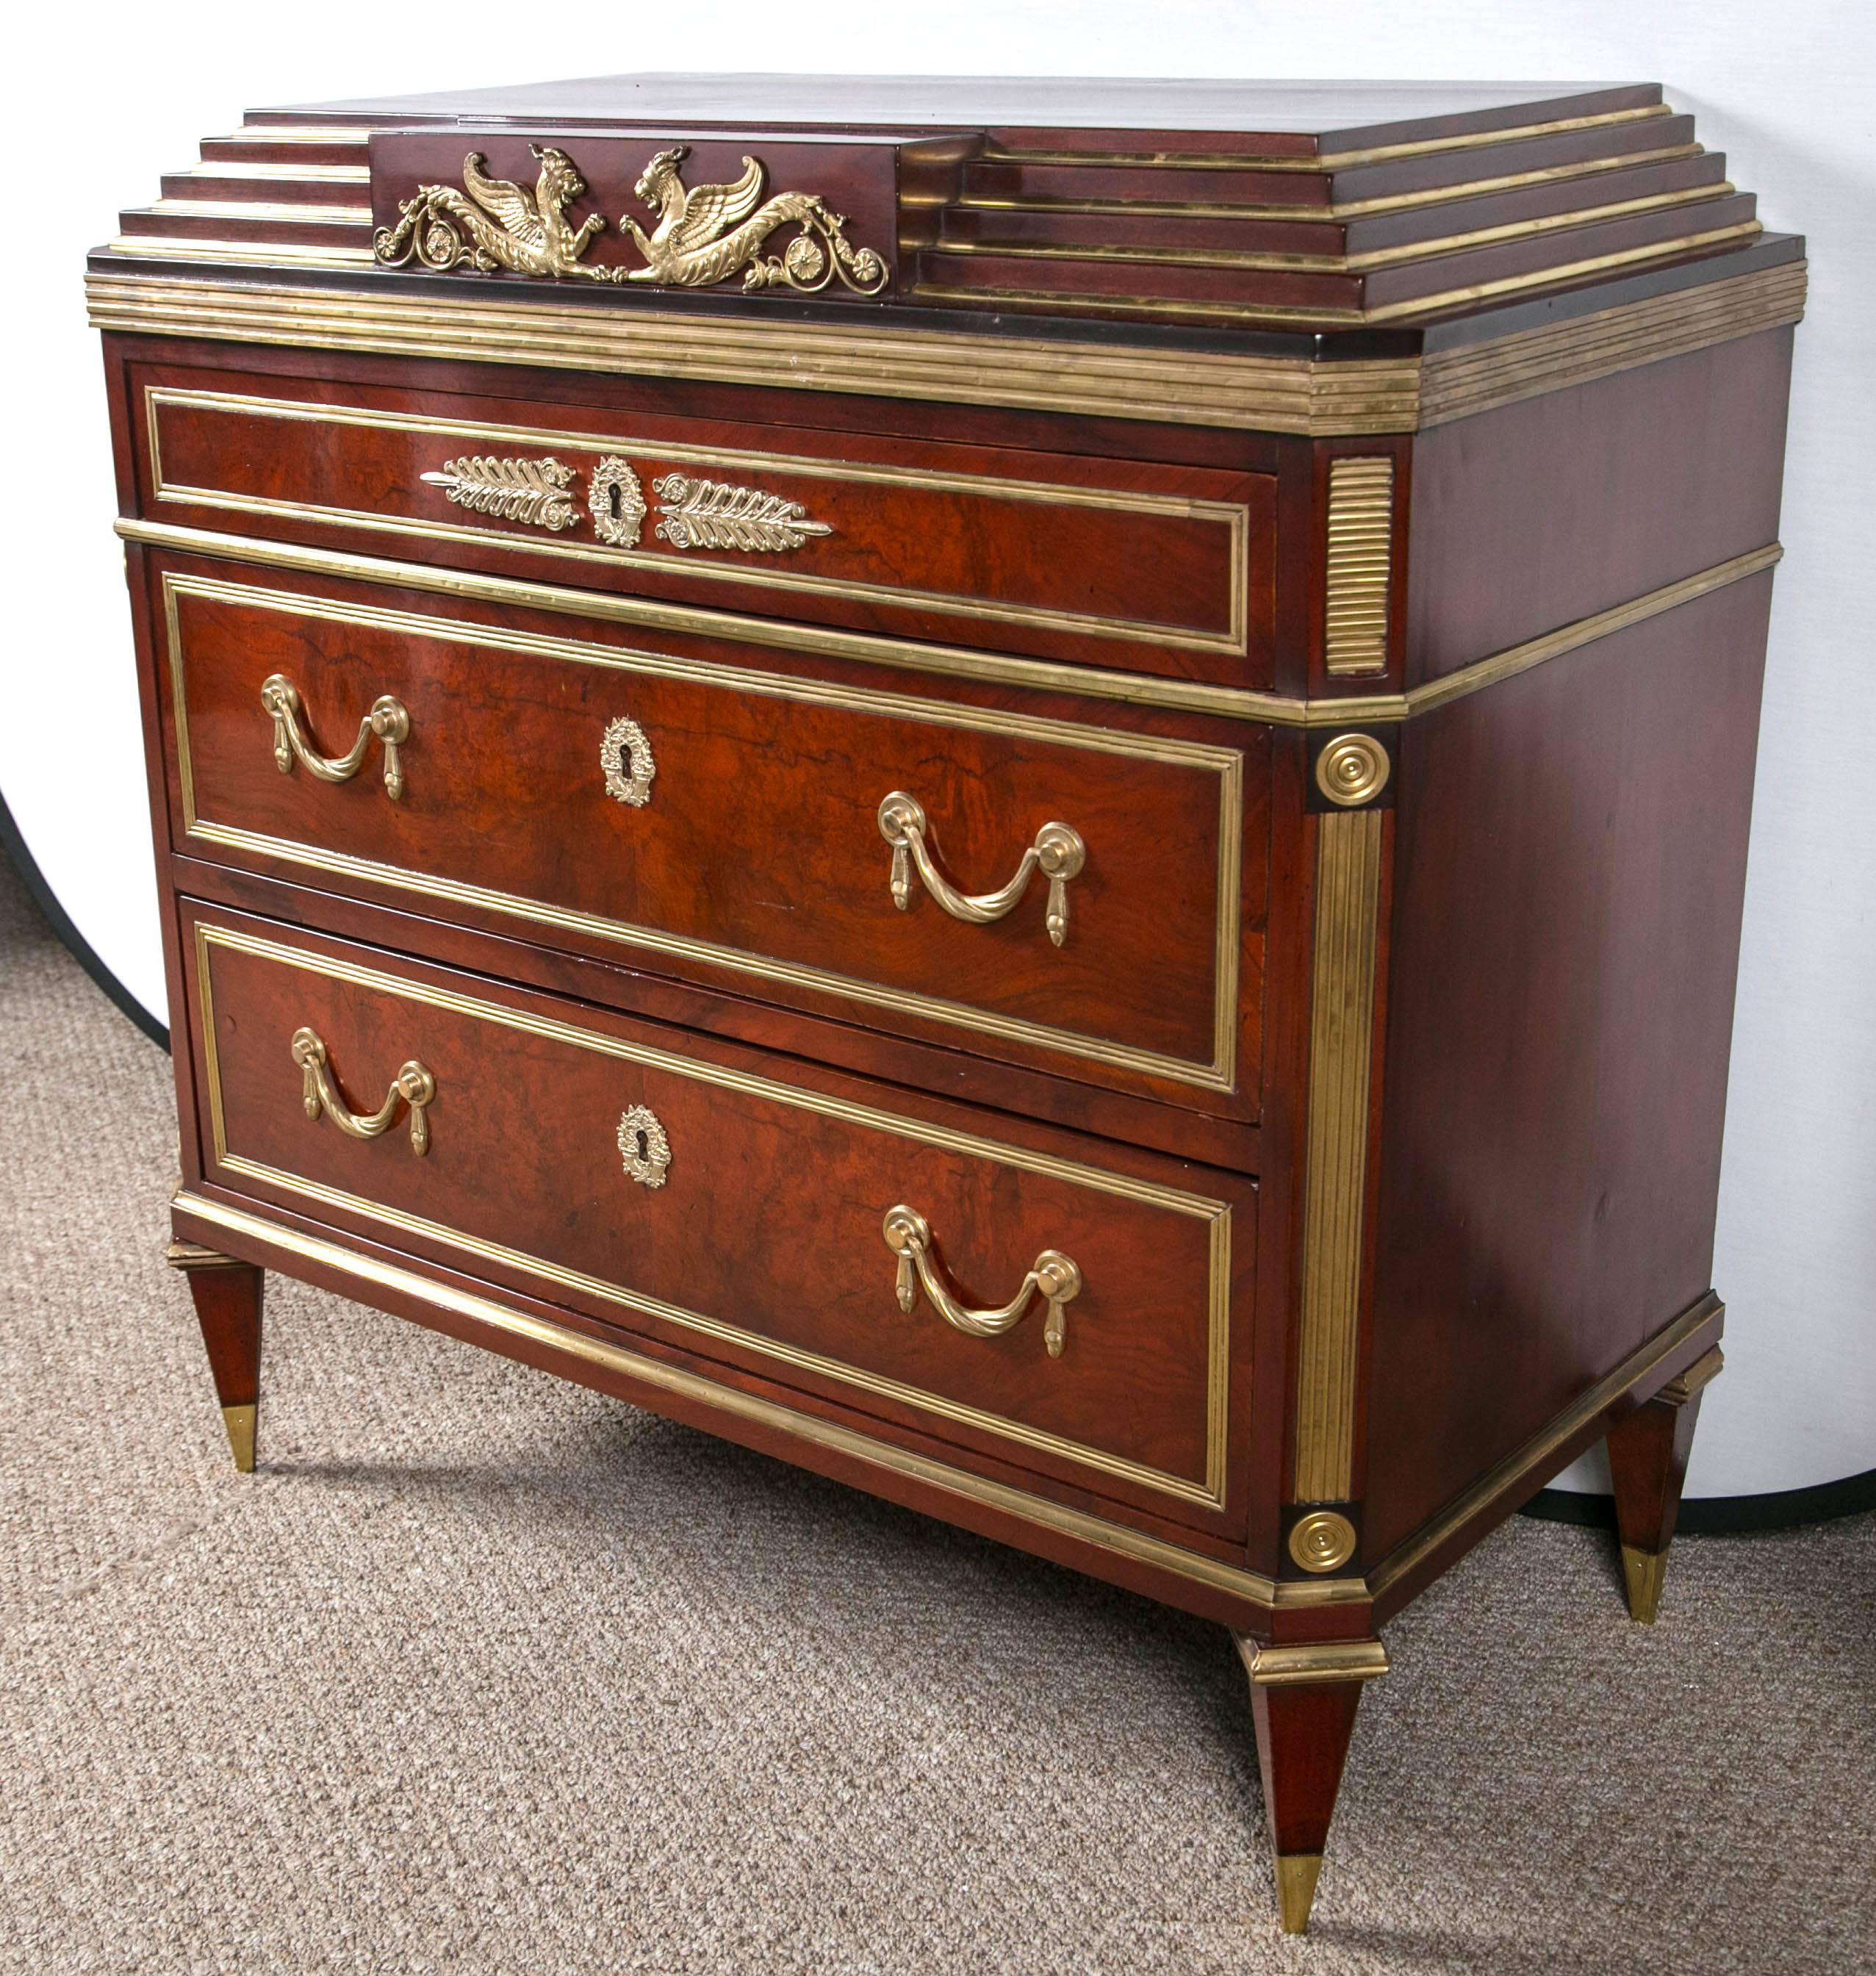 A Russian neoclassical step up commode. Three graduating drawers a true Fine antique recalling the age of old. The centerpiece consists of flying fighting dragons of bronze. The bronze mounts and drape design pulls are exquisite at every turn. The